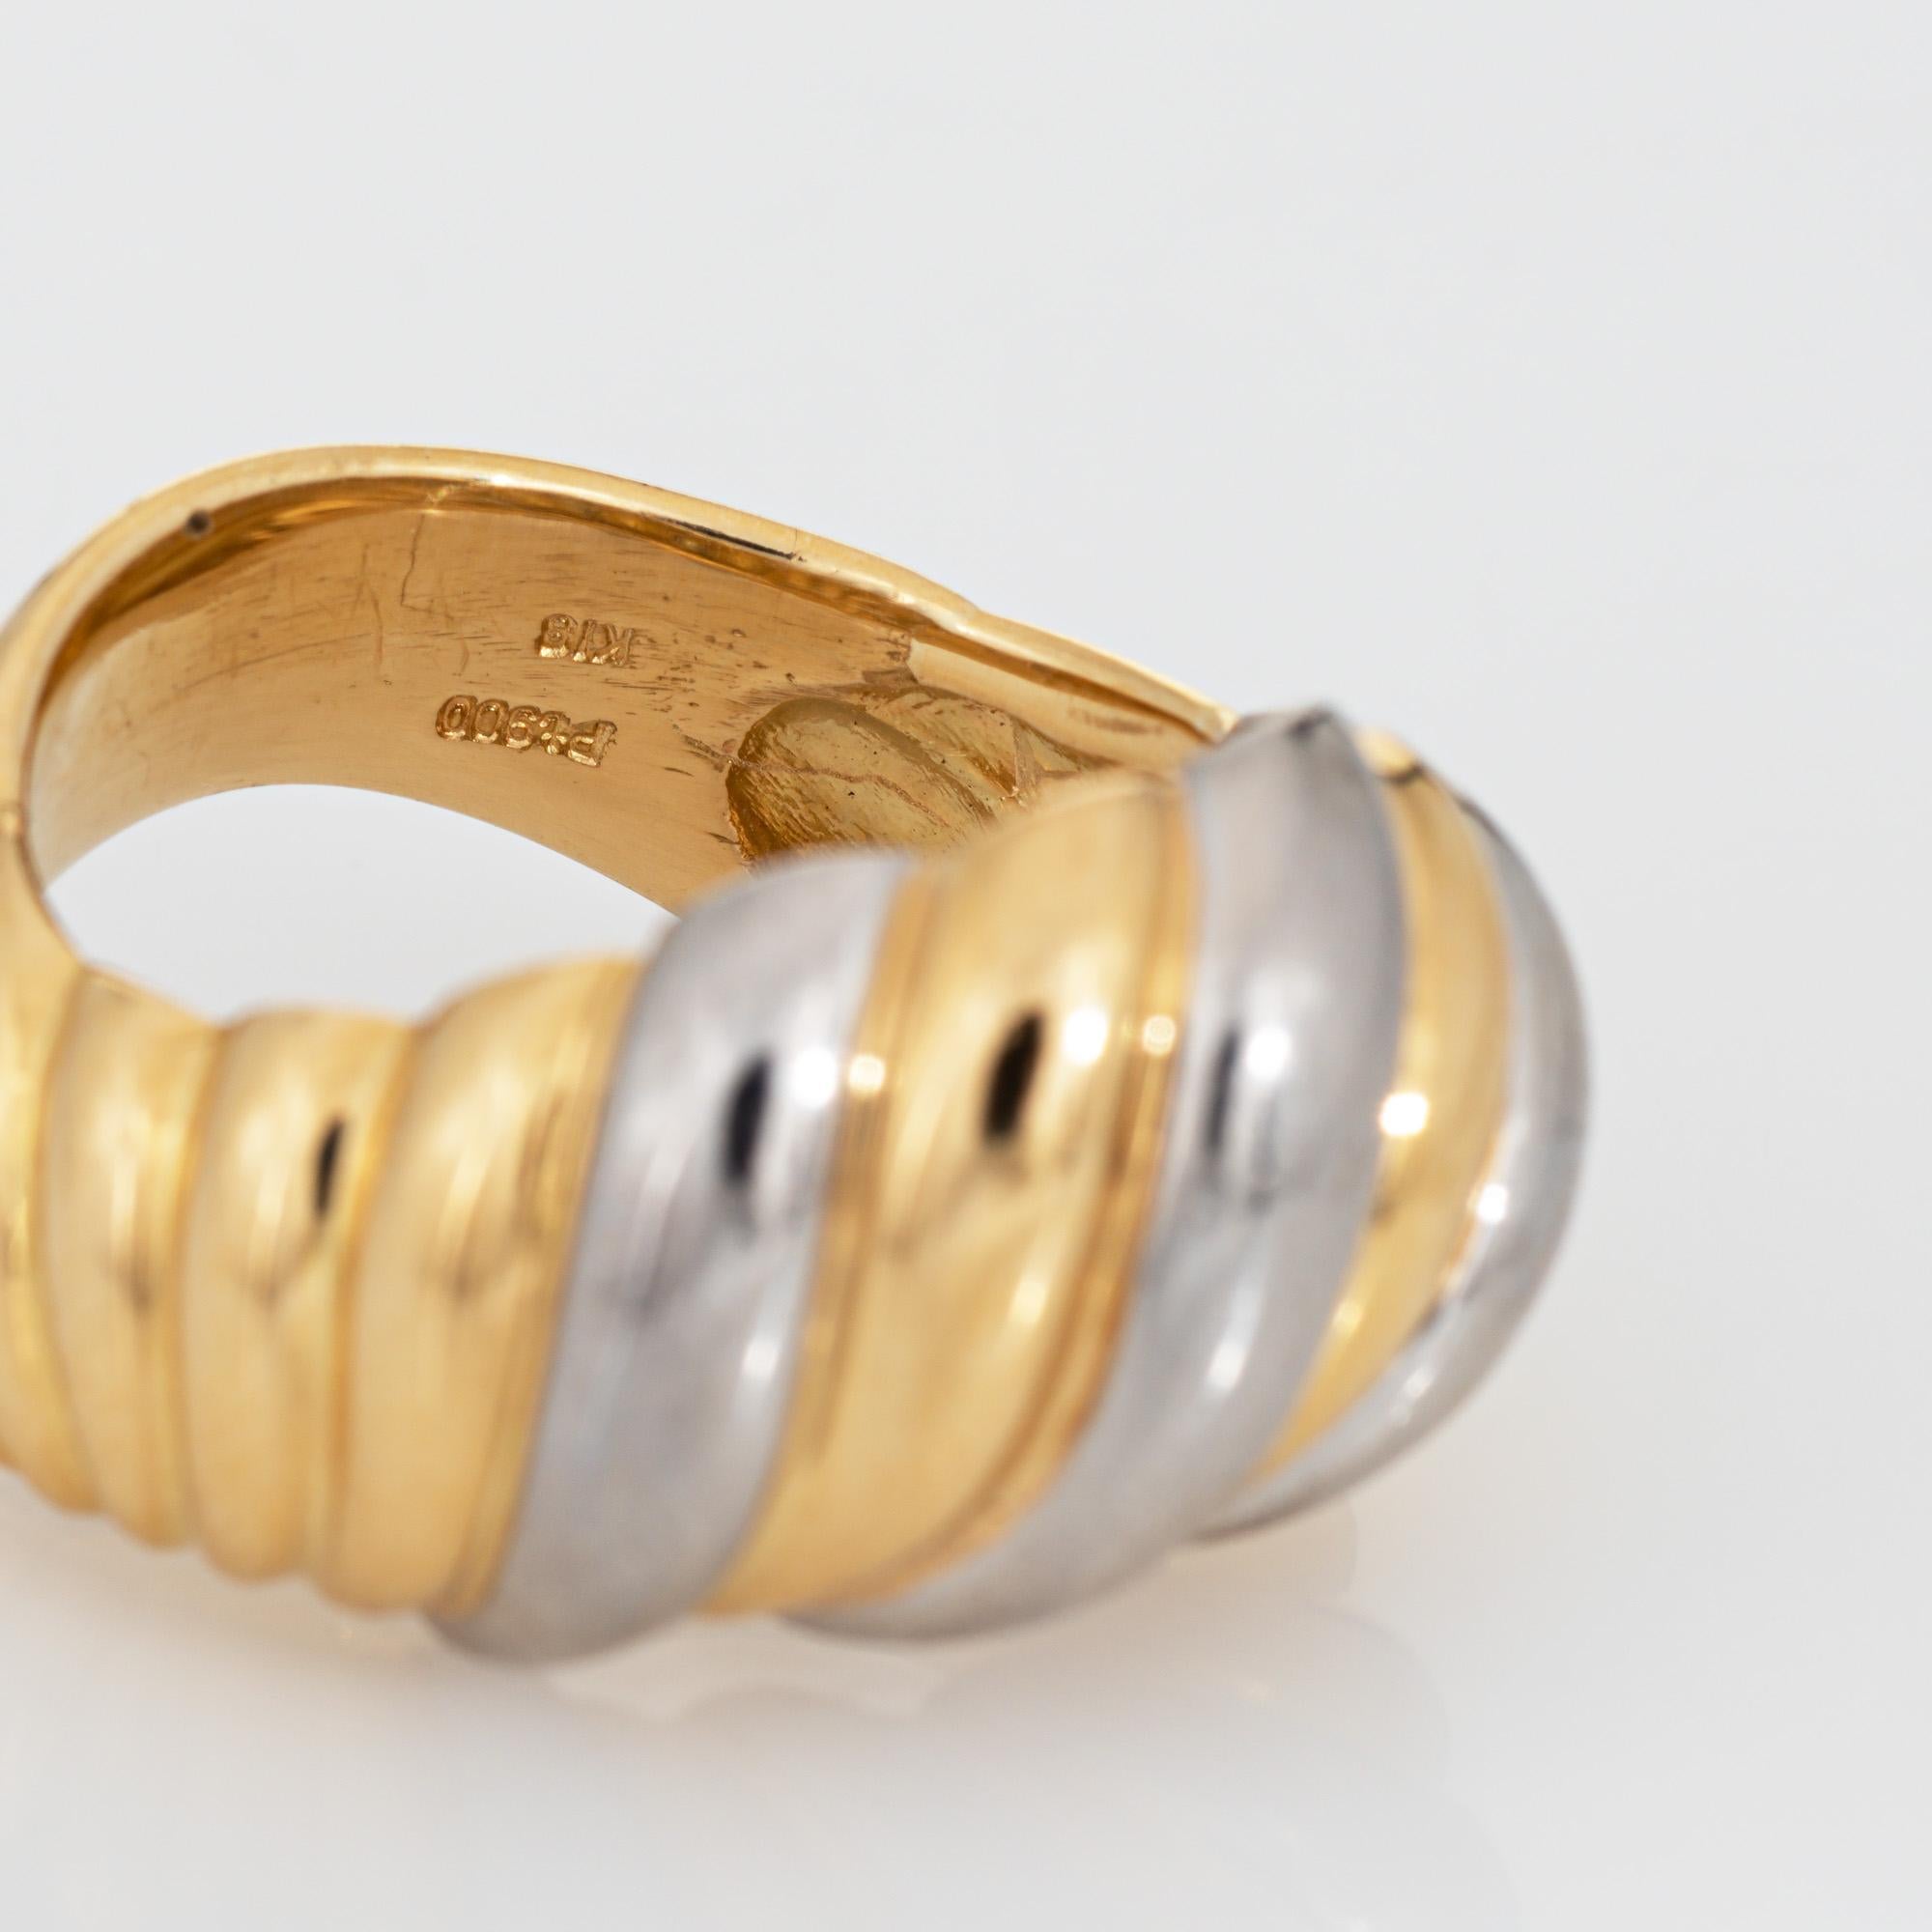 Vintage Fluted Dome Ring Platinum 18k Yellow Gold Two Tone Cocktail Band Sz 7 For Sale 2